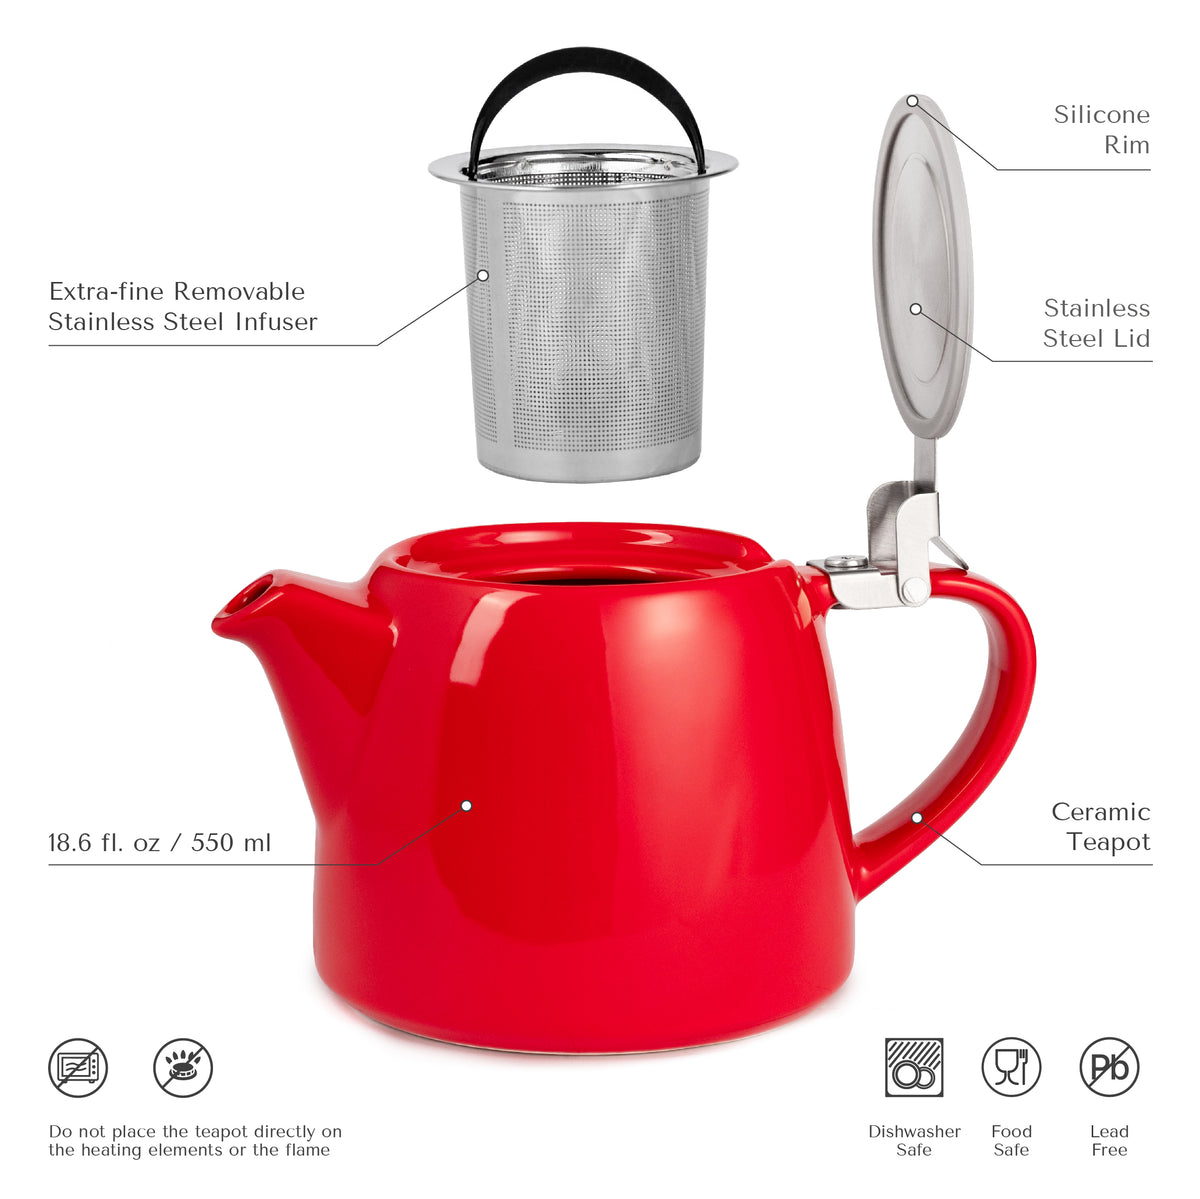 ORNA Ceramic Teapot with Basket Infuser and Stainless Steel Lid in Ora